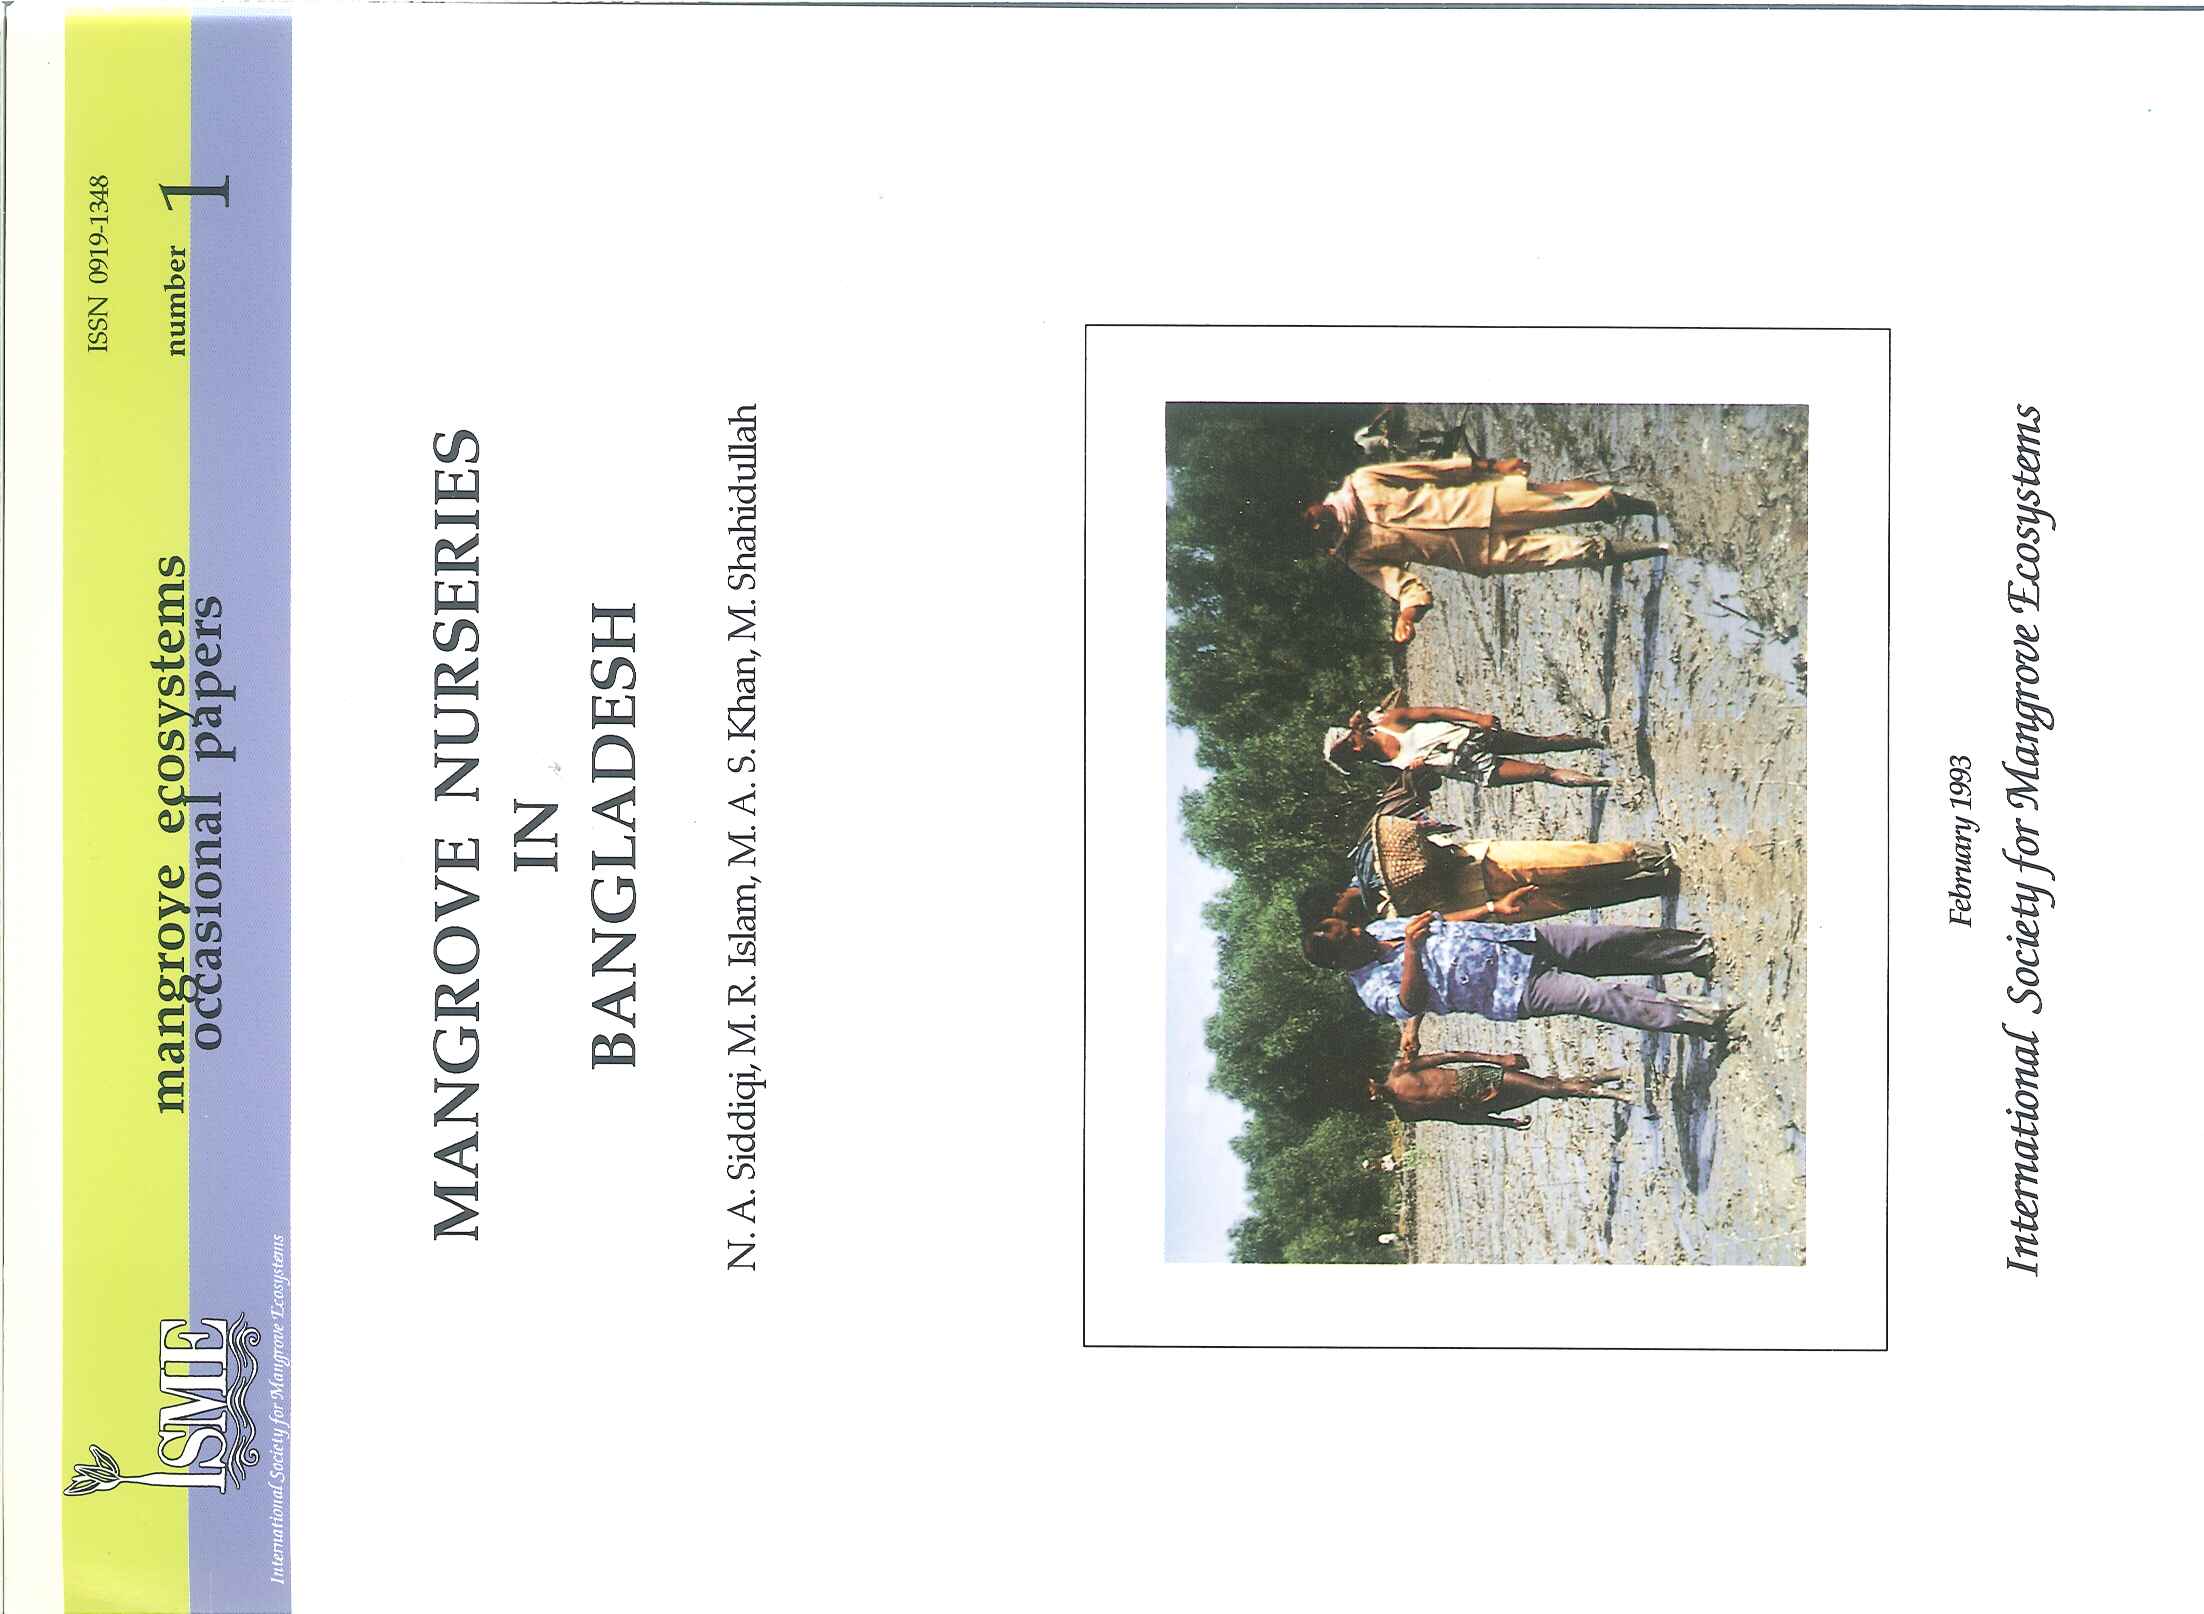 ISME Mangrove Ecosystems Occasional Papers No.1 - Mangrove Nurseries in Bangladesh